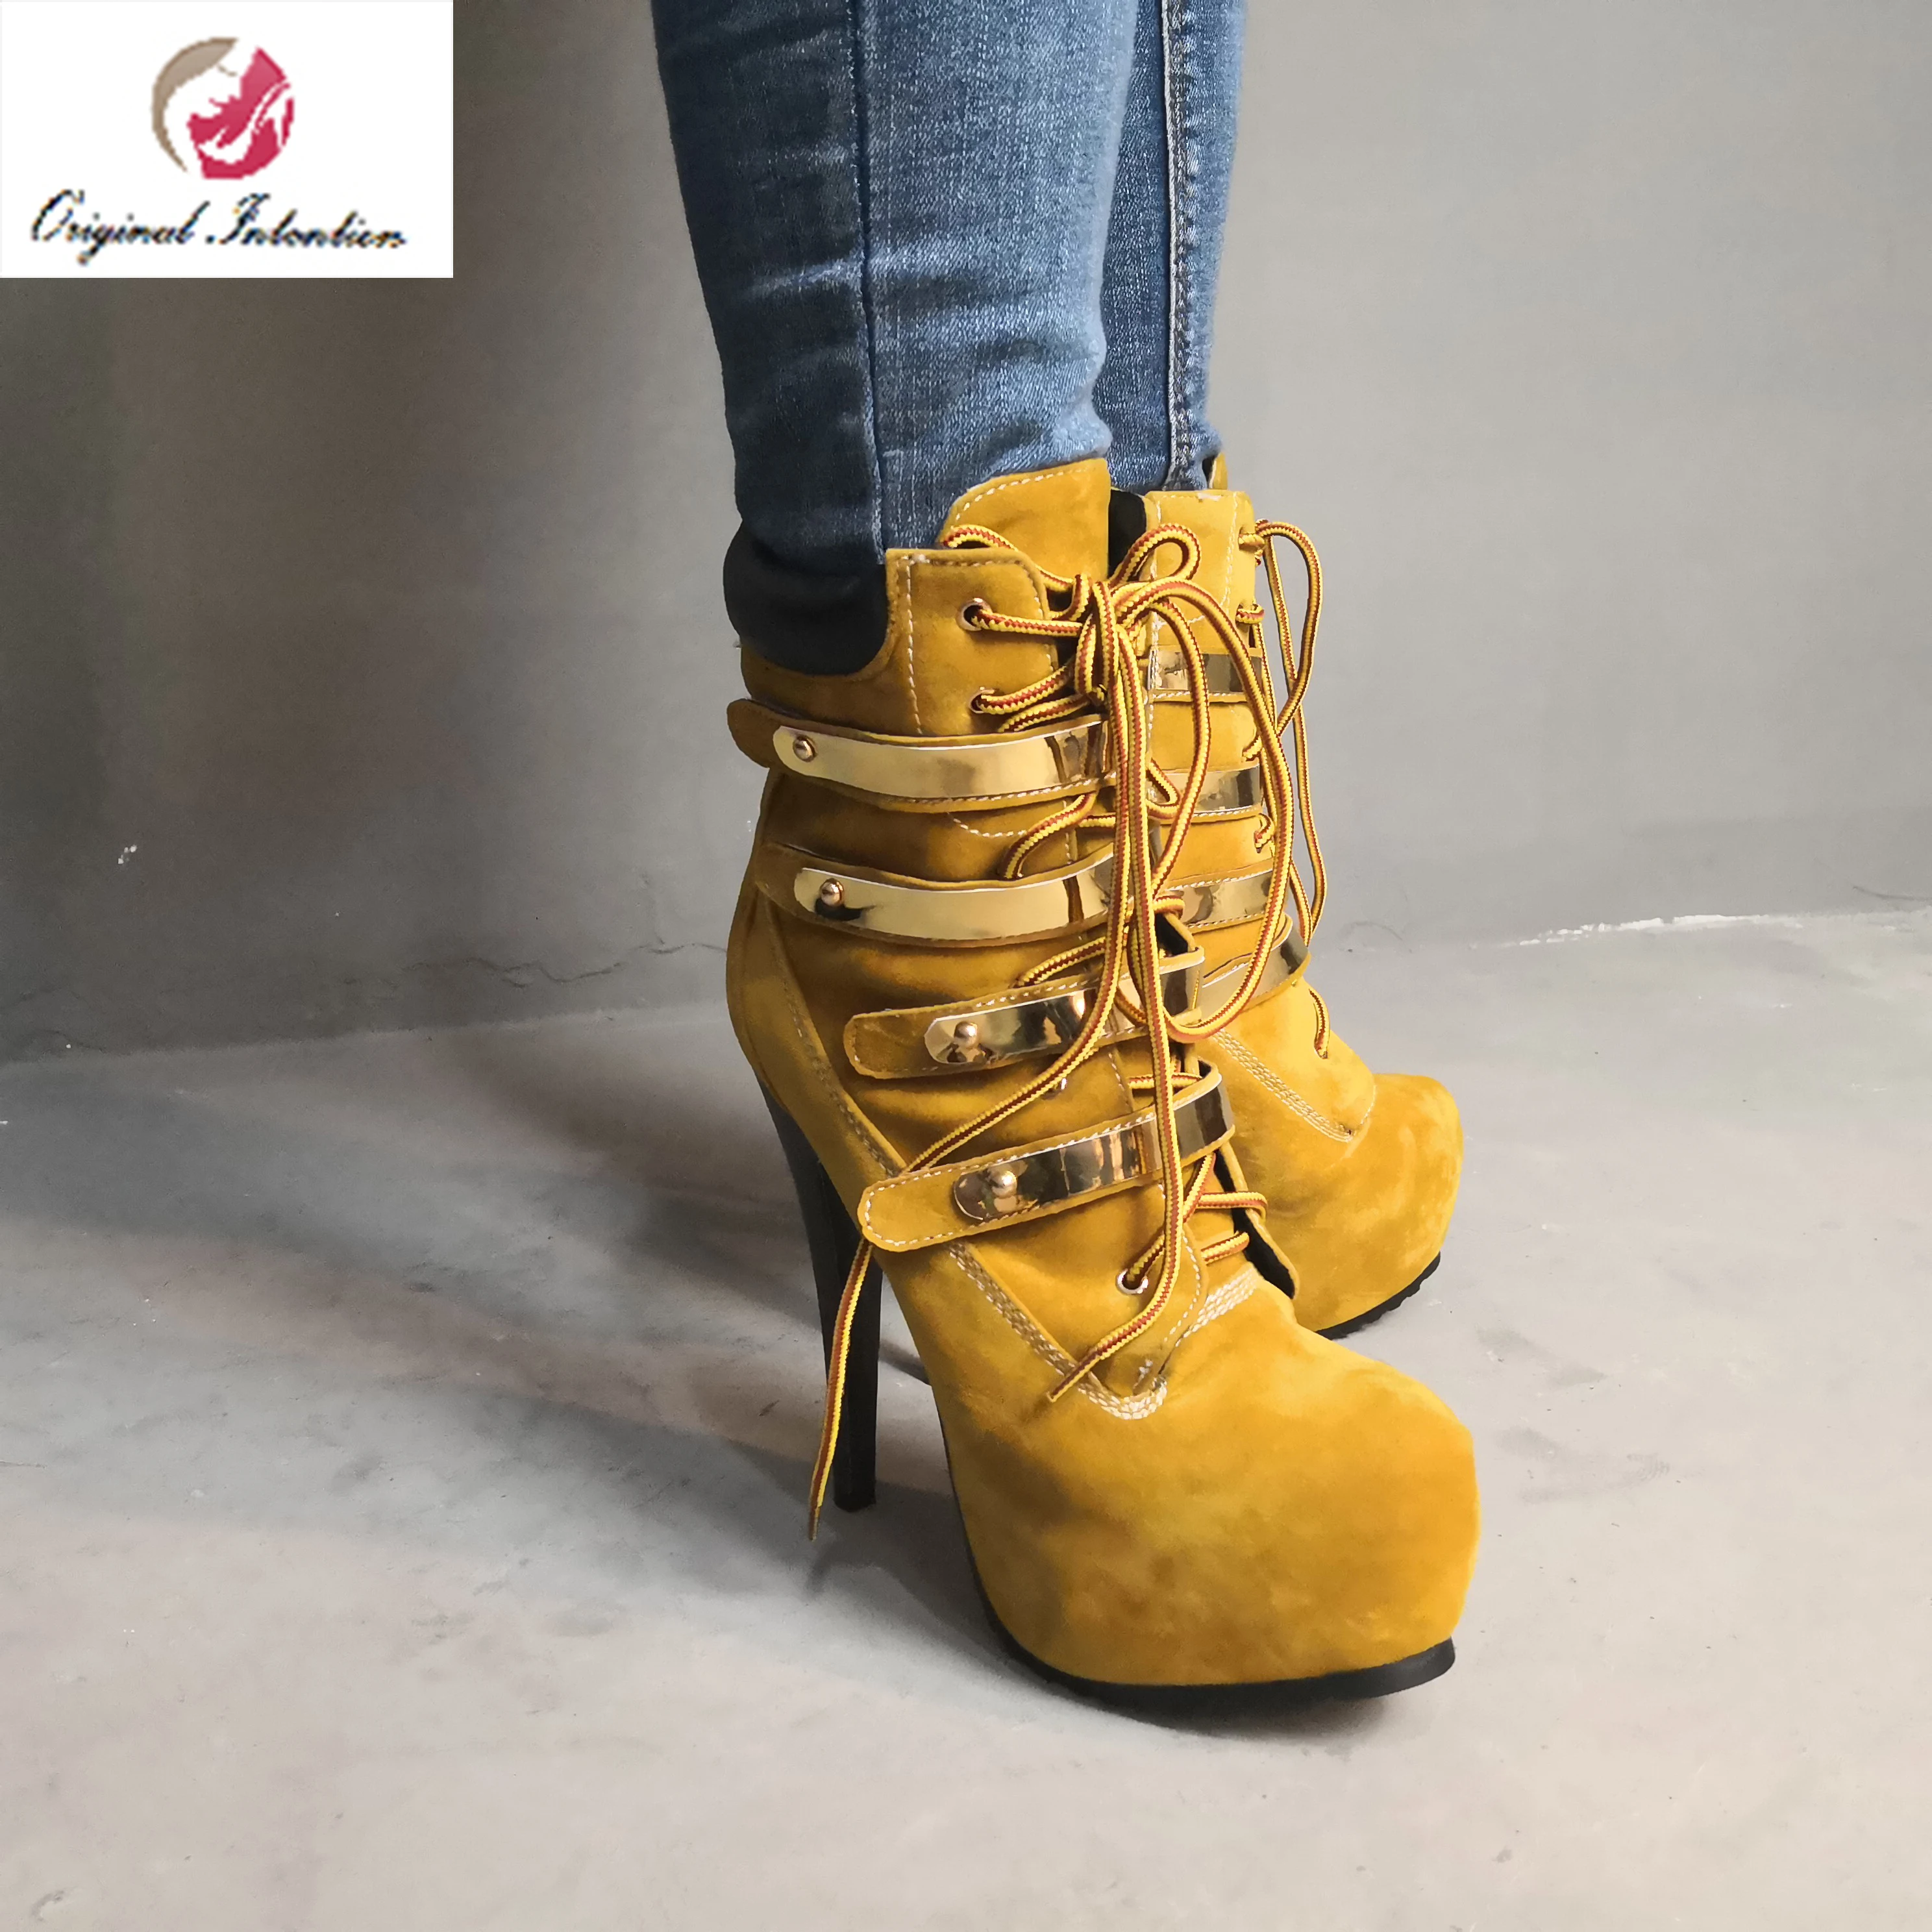 

Original Intention Sexy Stiletto High Heels Ankle Boots Women Winter Platform Round Toe Flock Yellow Shoes Woman Size 4-15